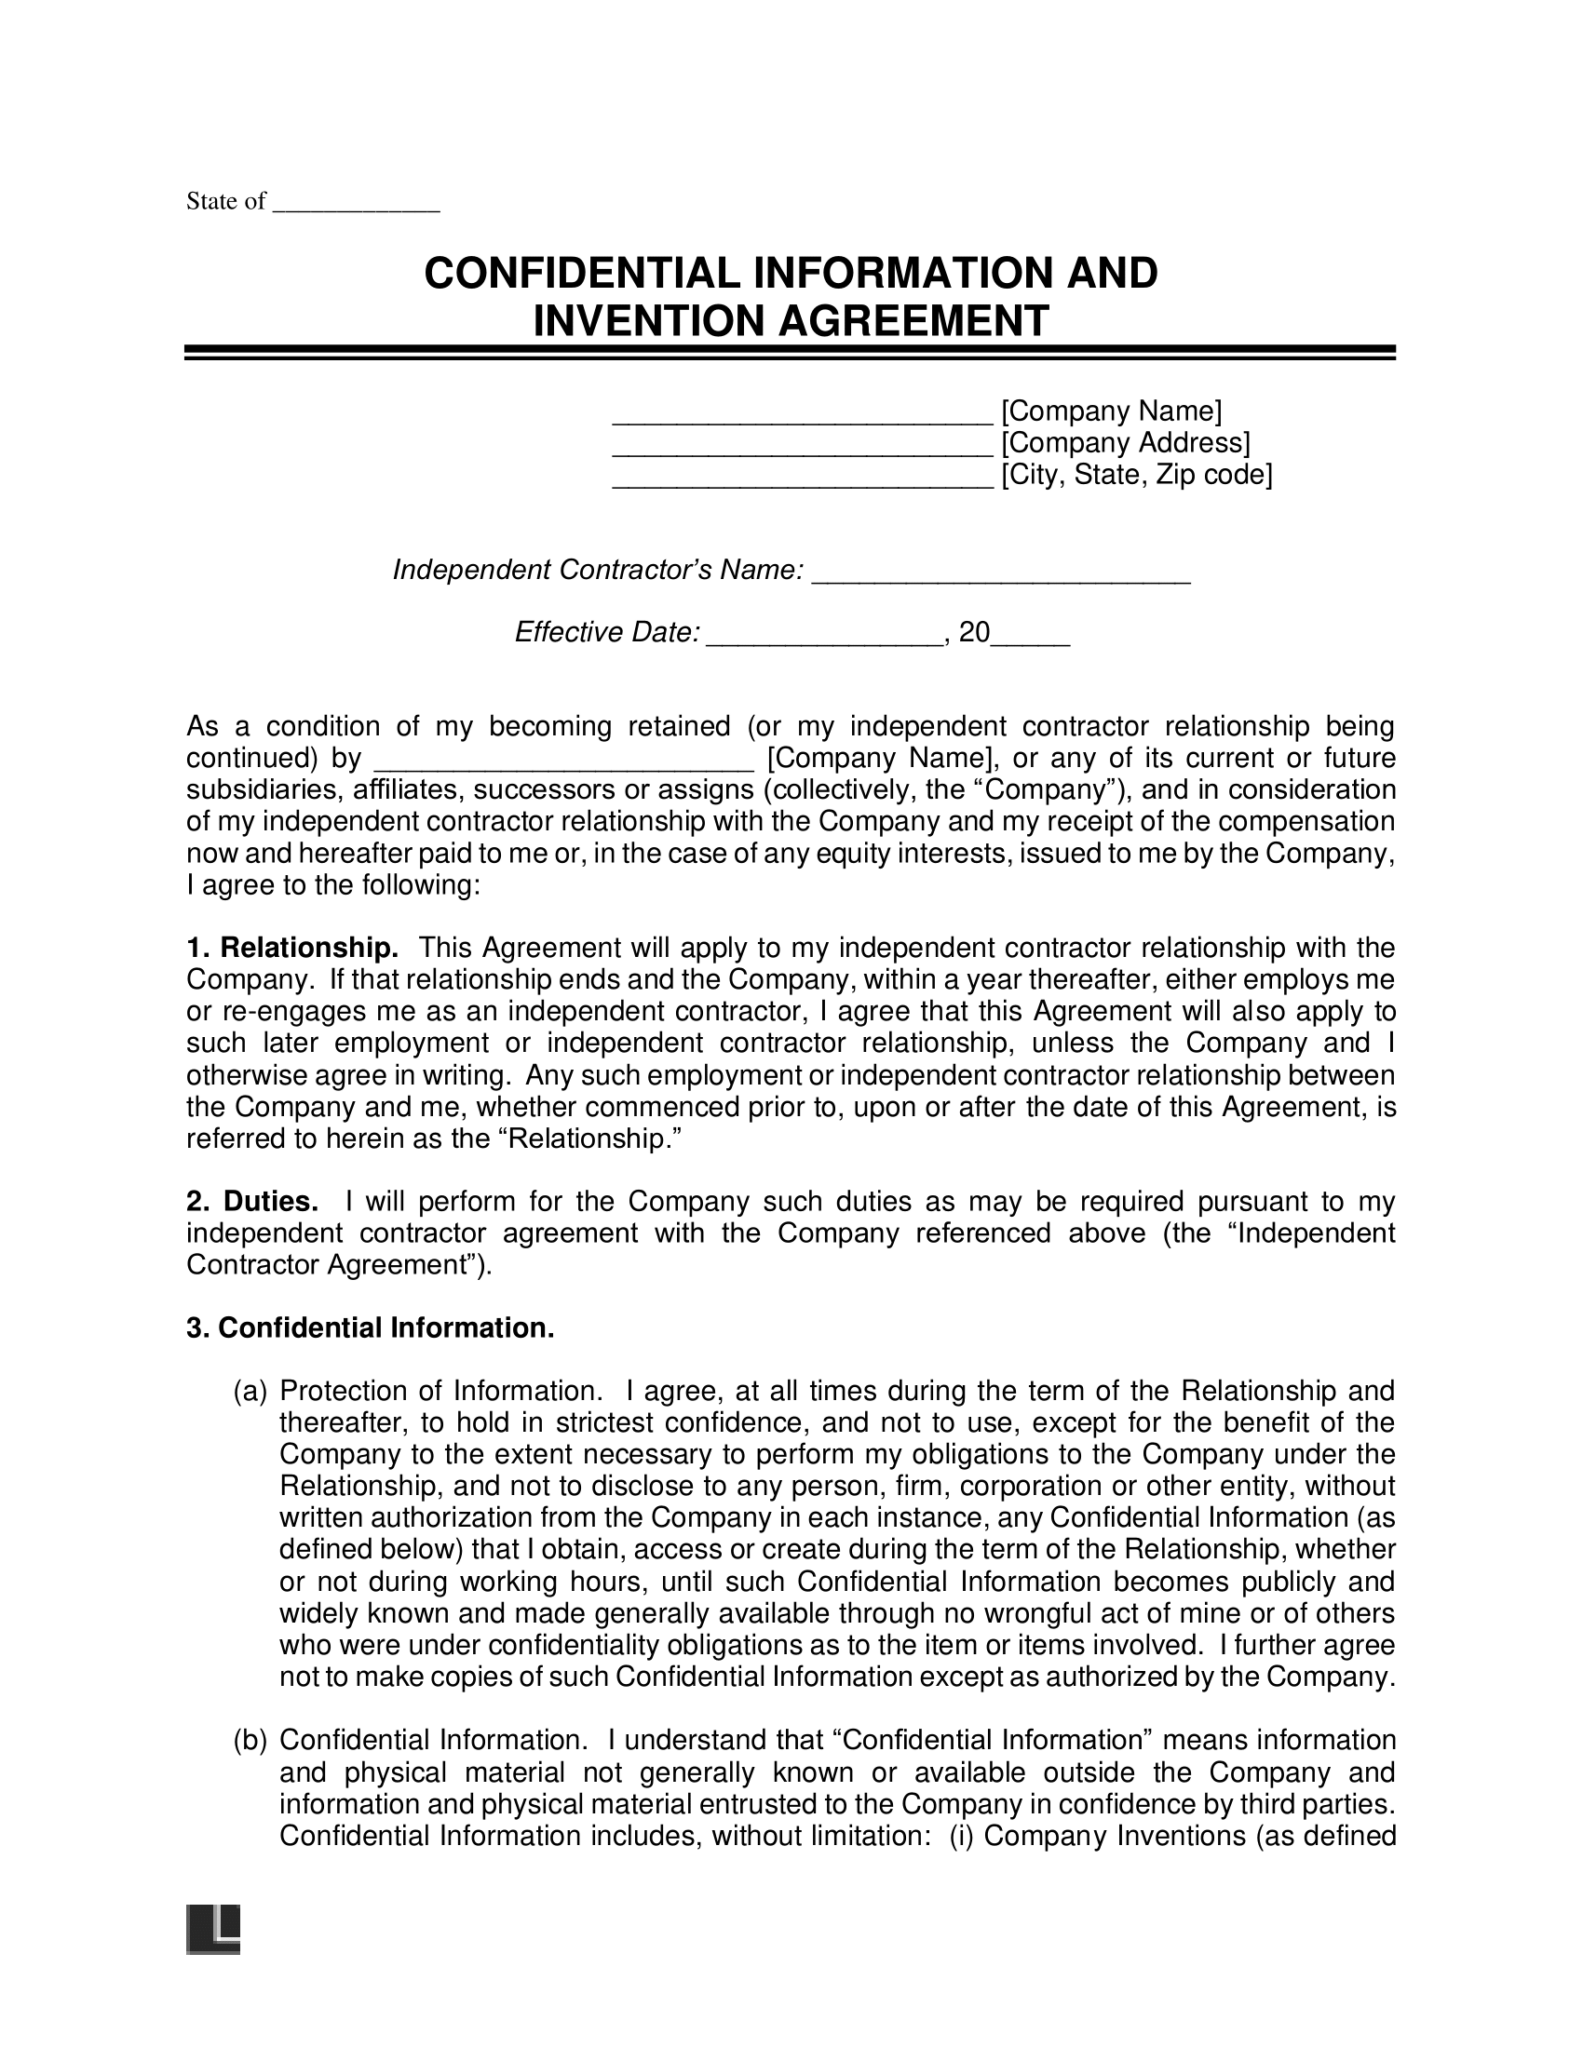 confidentiality non competition and invention assignment agreement